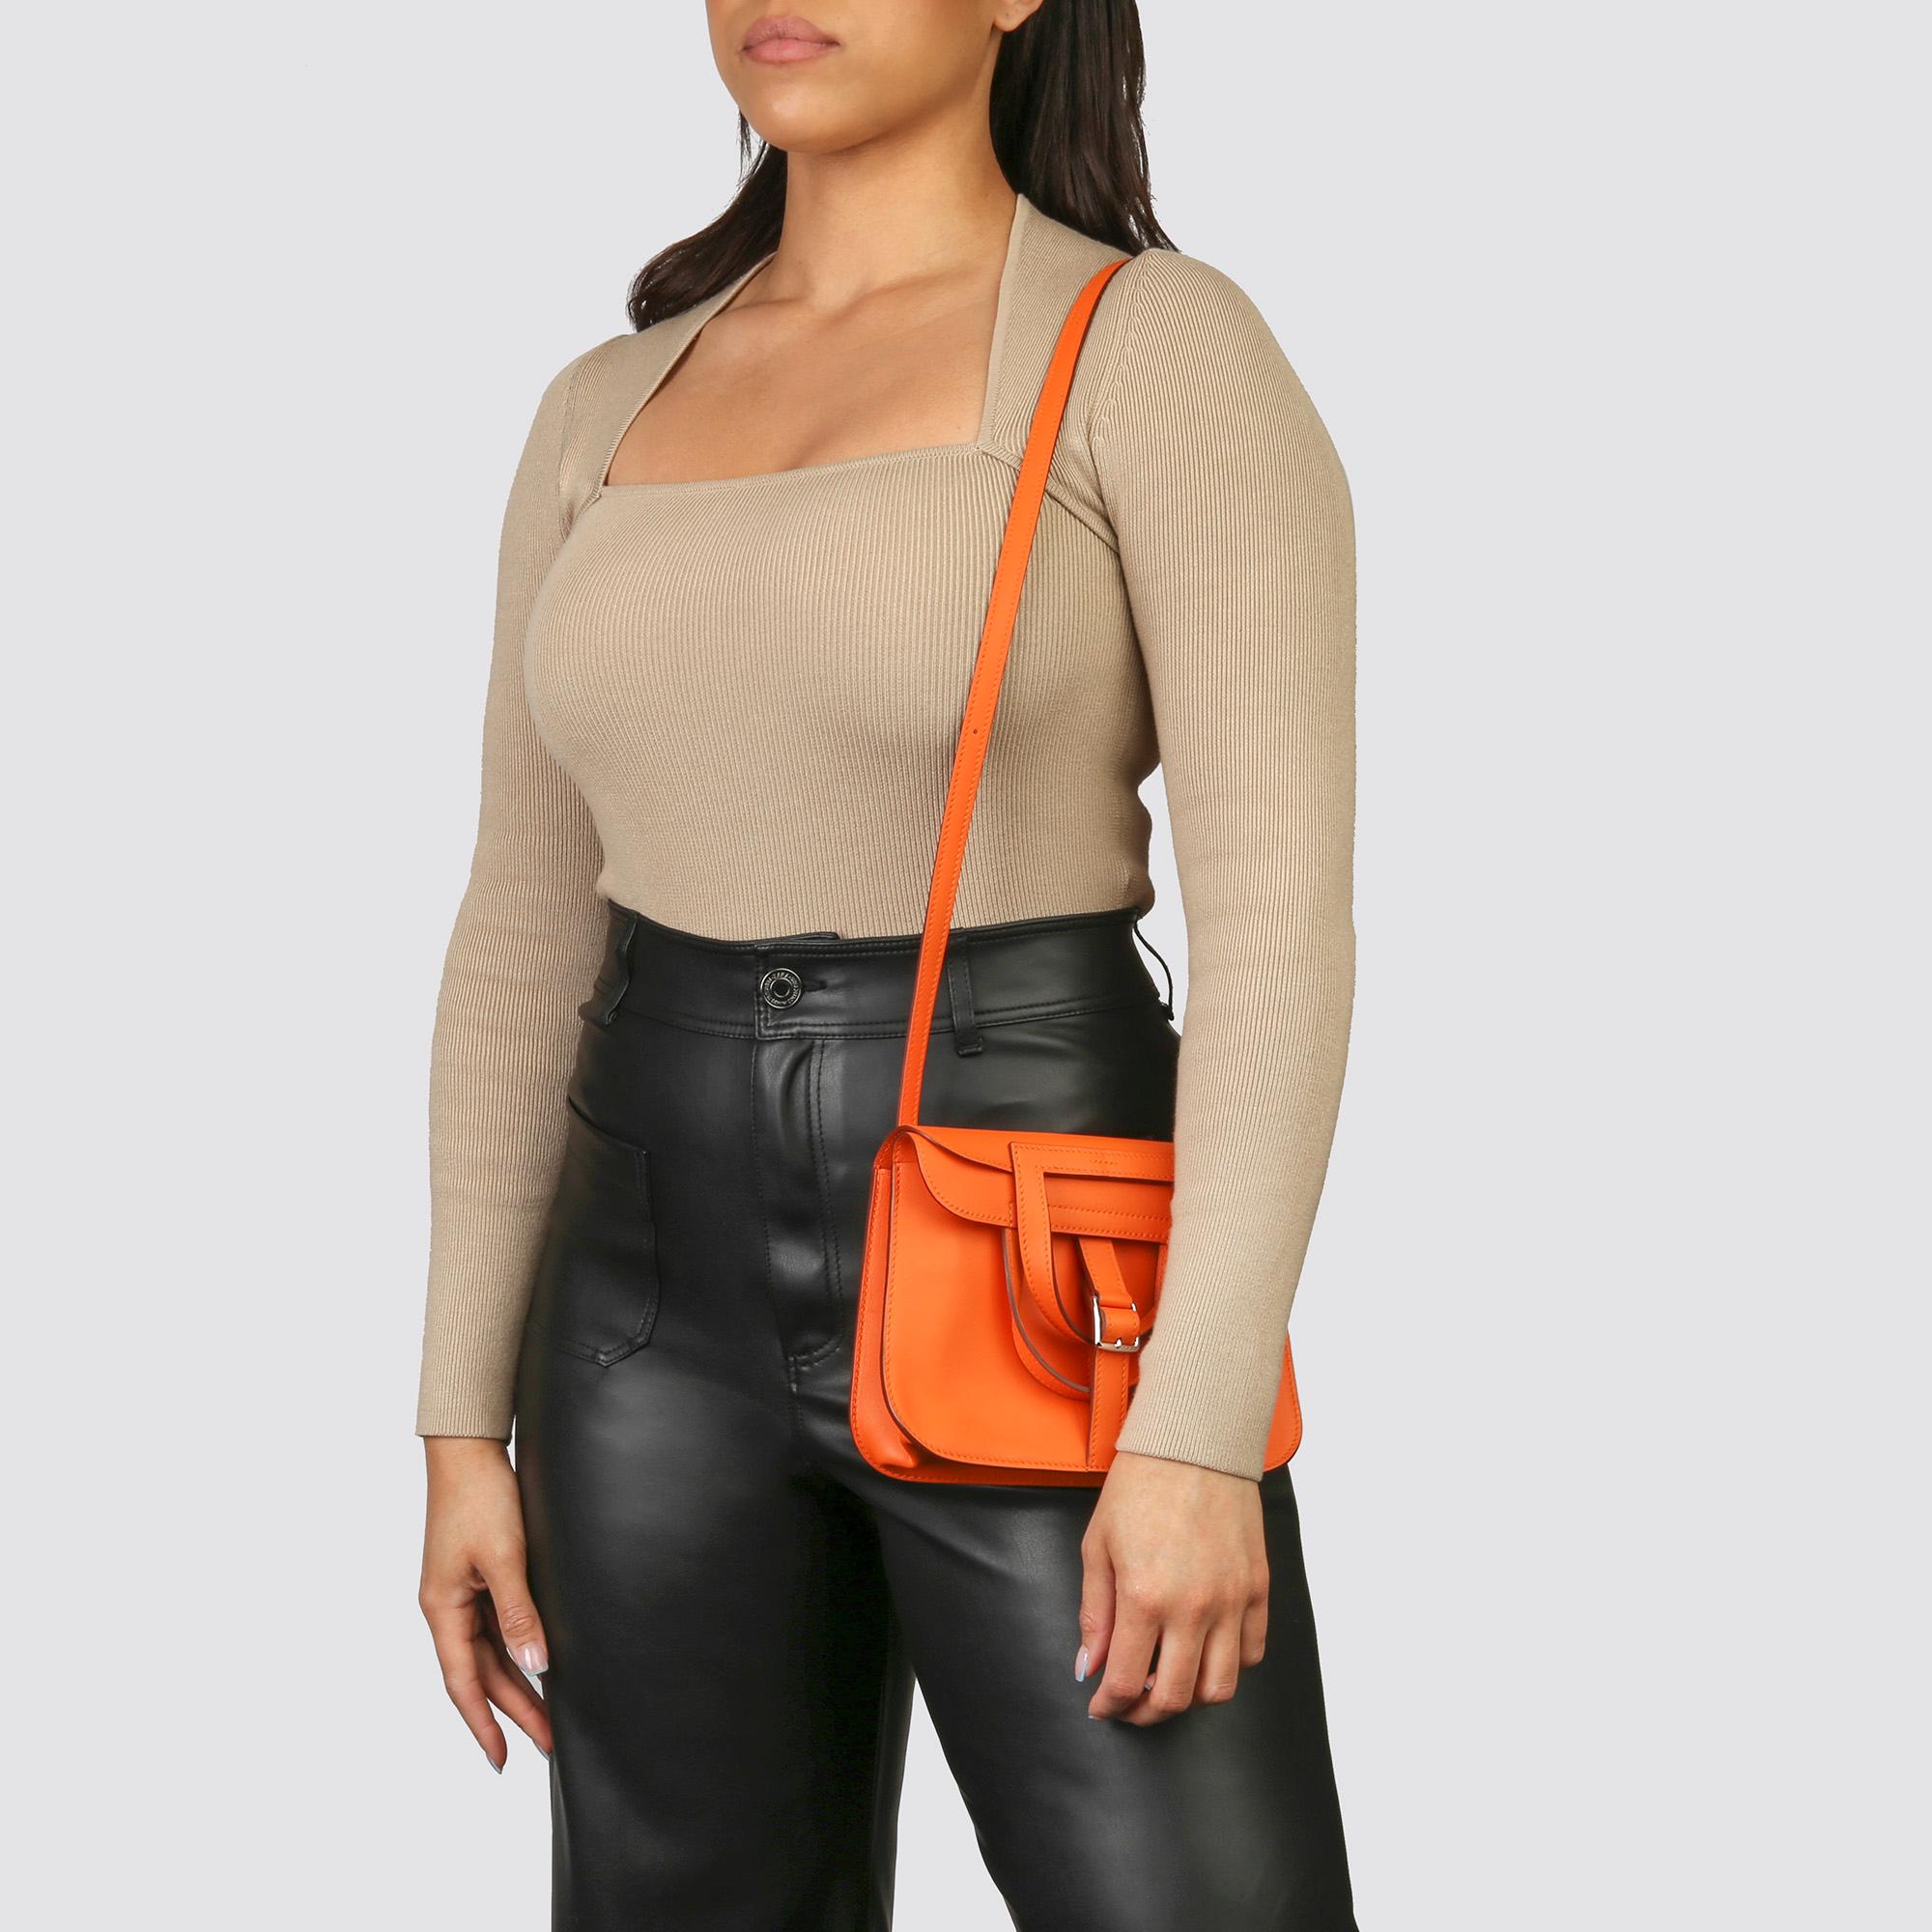 HERMÈS
Orange H Swift Leather Halzan 22

Xupes Reference: HB4490
Serial Number: X
Age (Circa): 2016
Accompanied By: Hermès Dust Bag, Box, Strap
Authenticity Details: Date Stamp (Made in France) 
Gender: Ladies
Type: Tote, Shoulder,